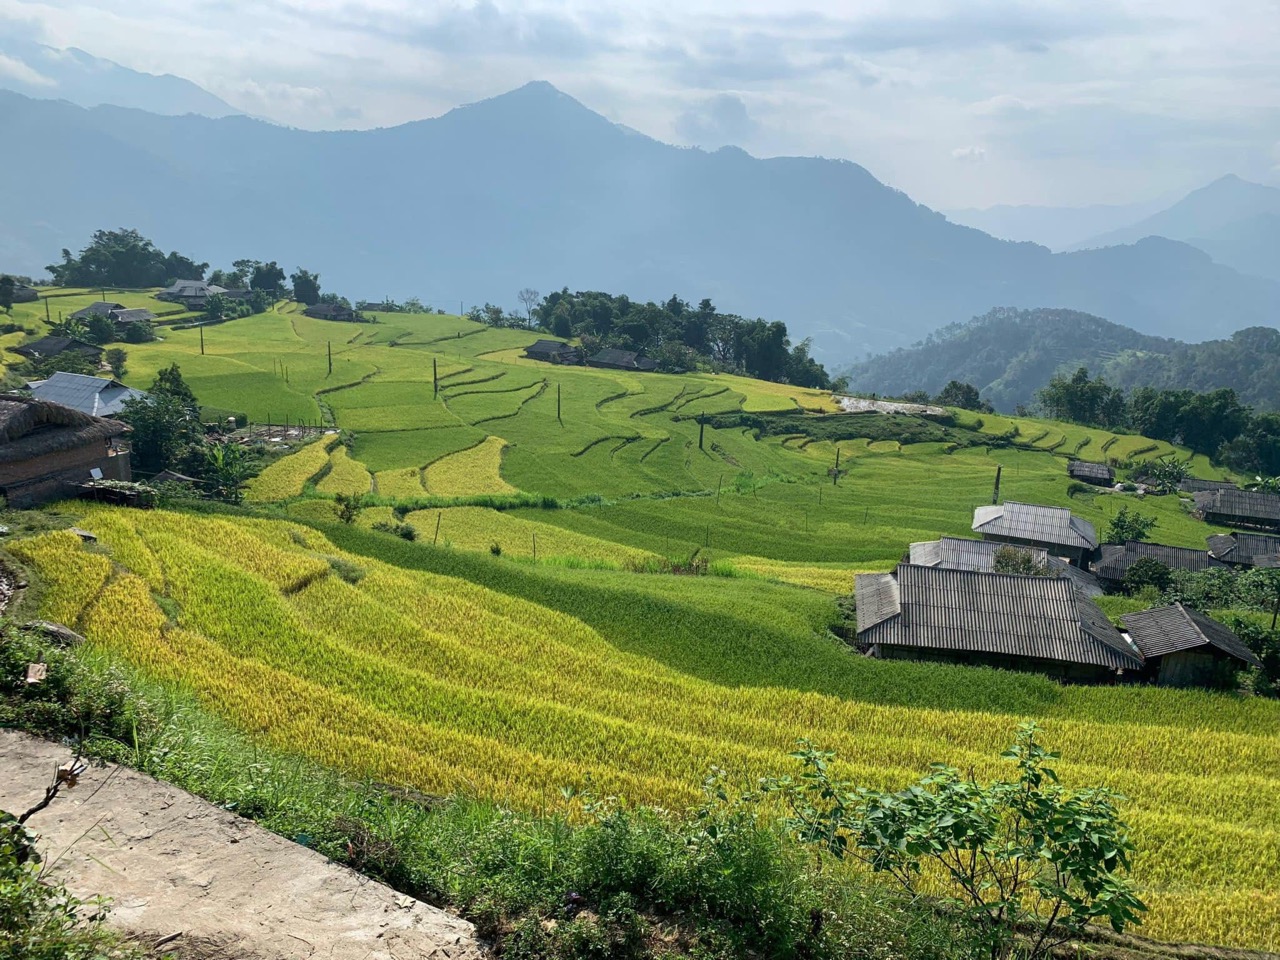 things-to-do-in-ha-giang-loop-travel-guide-backpacking-itinerary-road-trip-3-days-hostels-police-what-to-do-in-ha-giang-map-tour-route-motorbike00001